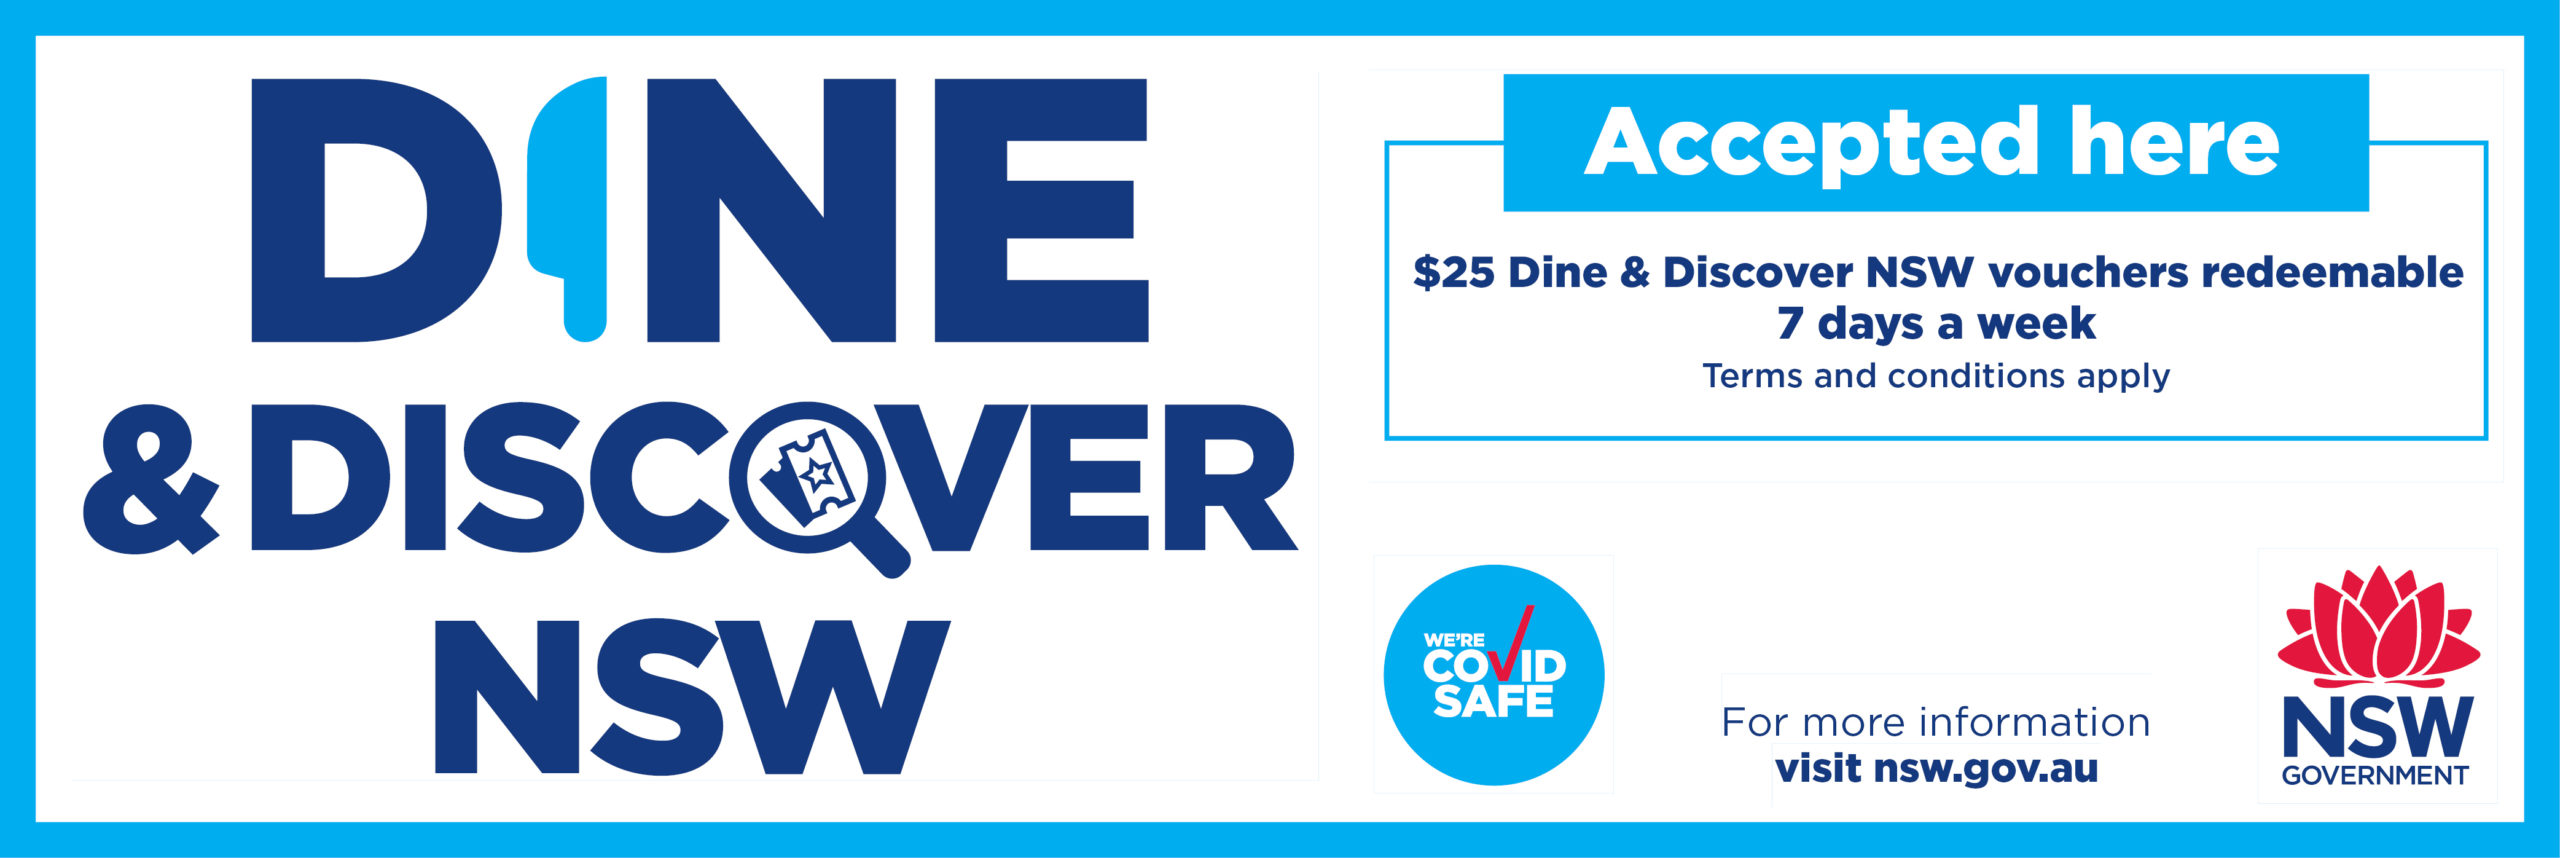 DINEandDiscover 2021_Web Home_update